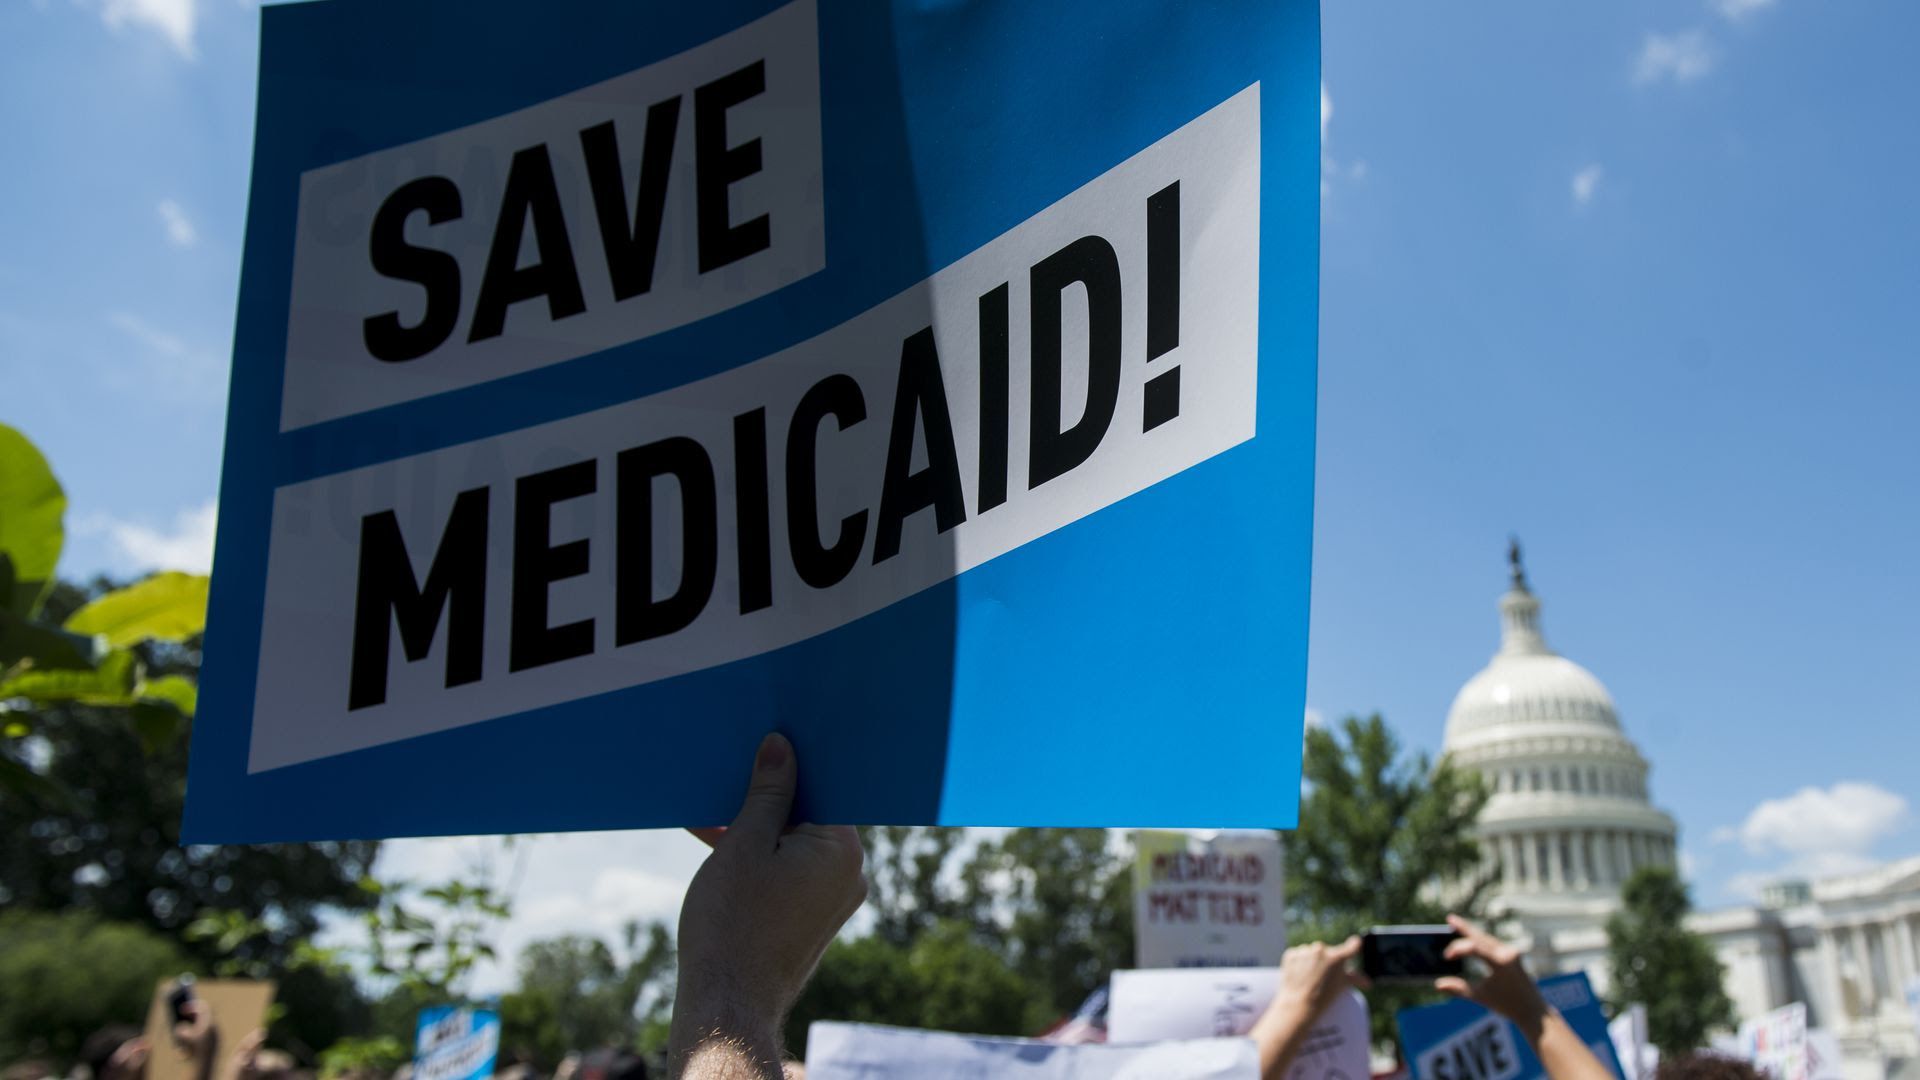 A protesting sign that reads, "Save Medicaid!"